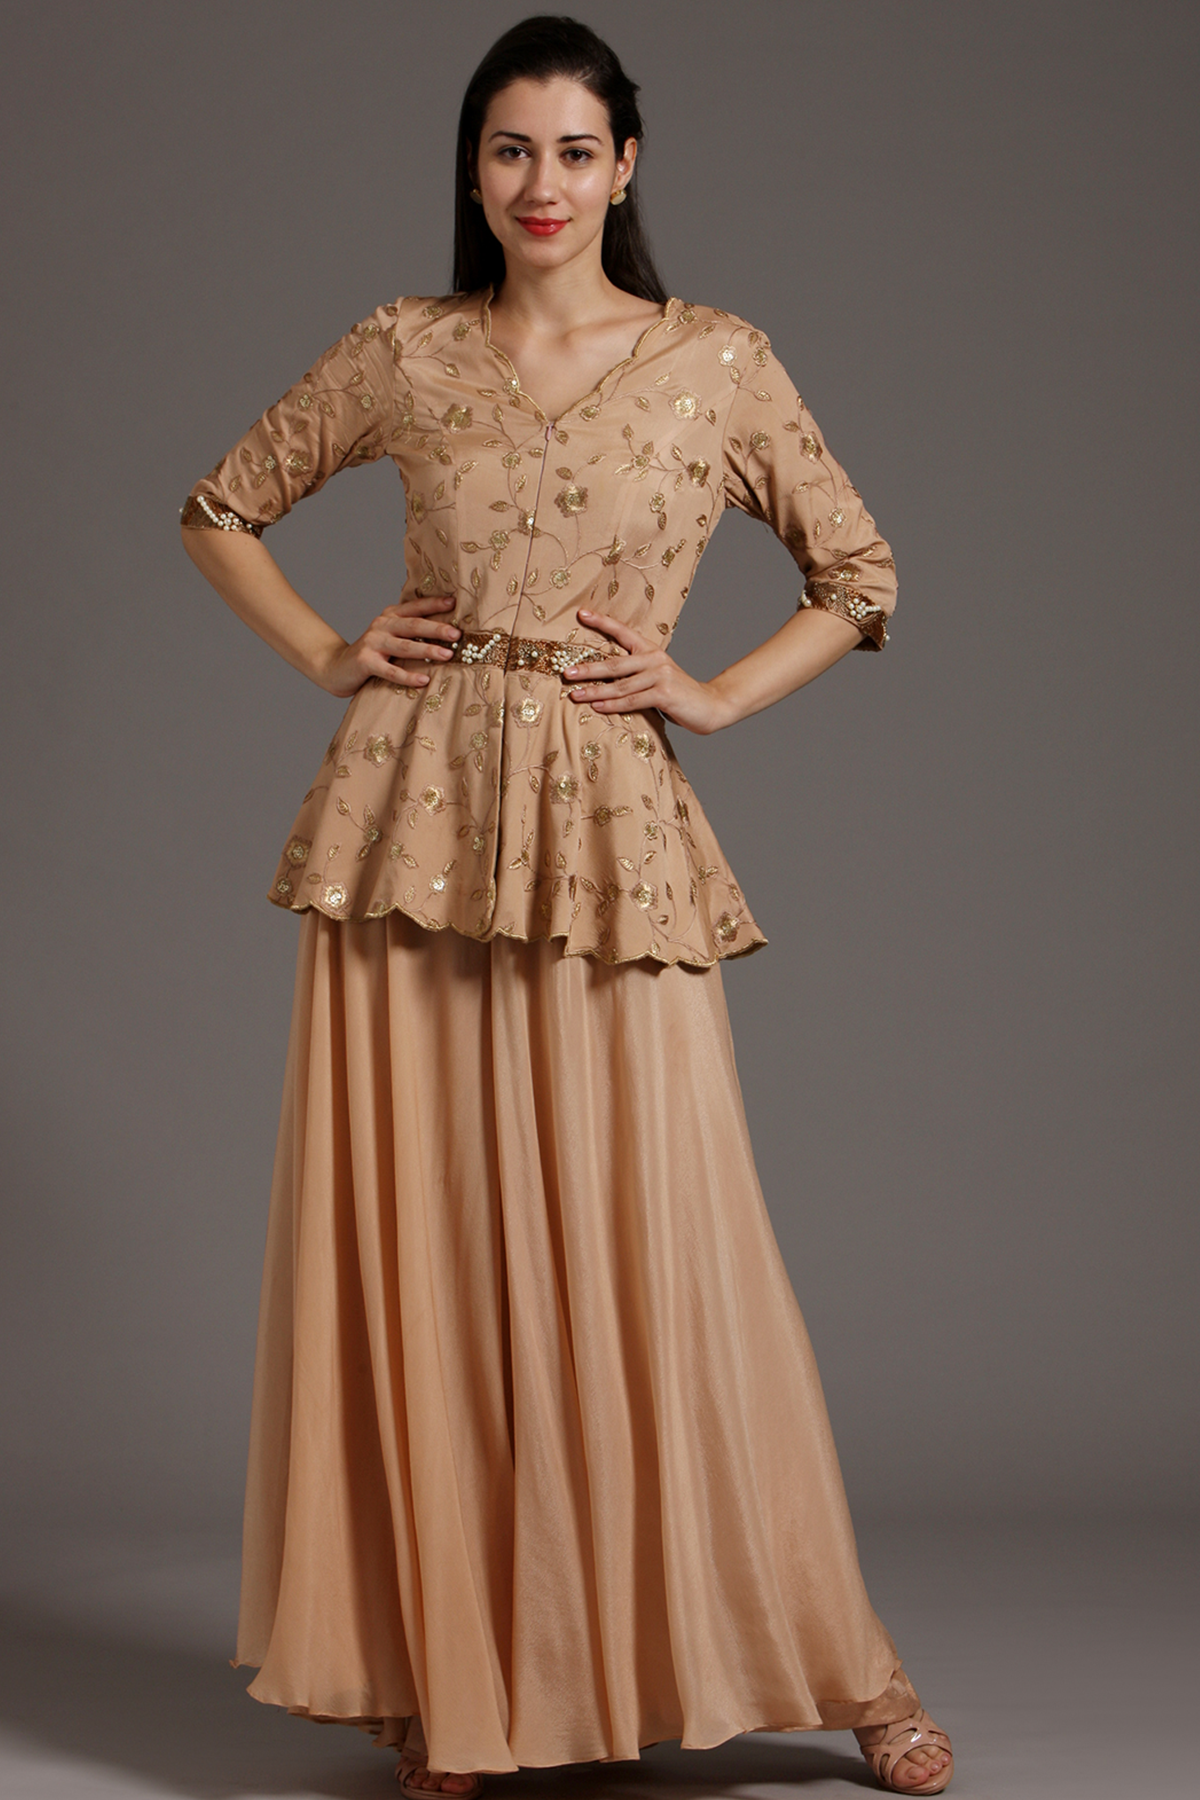 Peach crepe peplum jumpsuit with cutdana , pearl beads and threadwork embellishments.